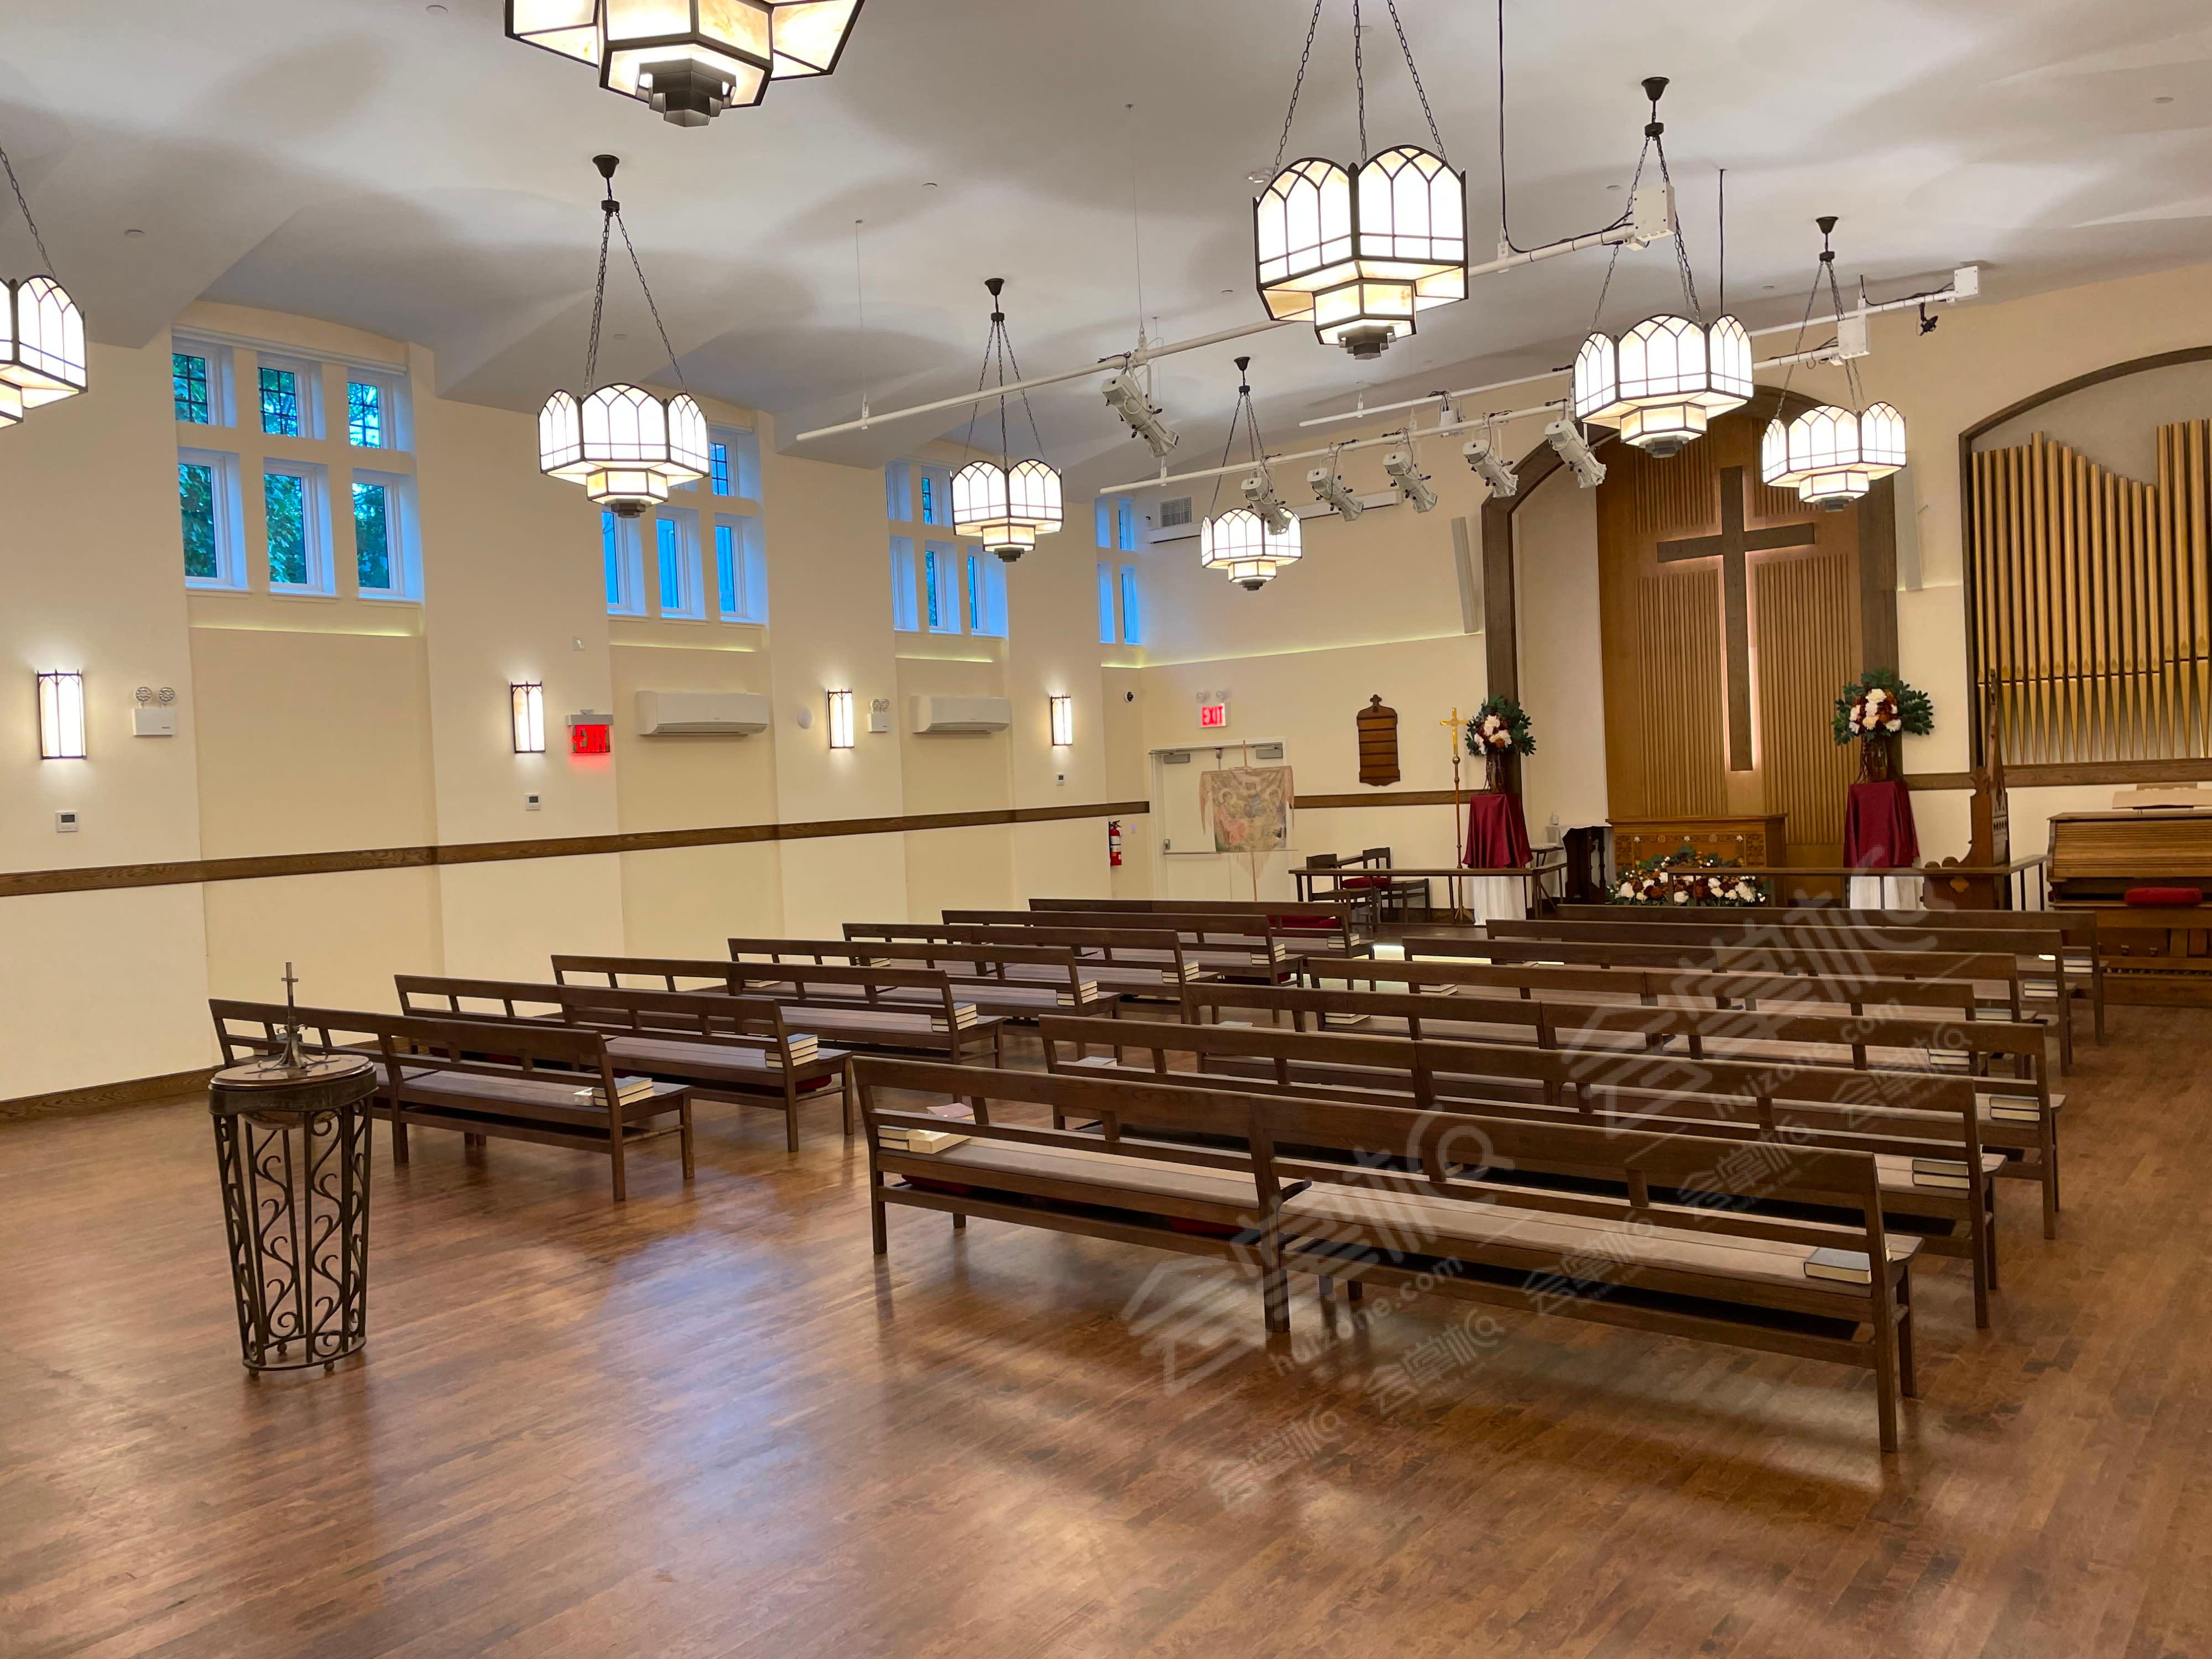 Multipurpose Event Space for Receptions, Large Meetings, Lectures, and more!